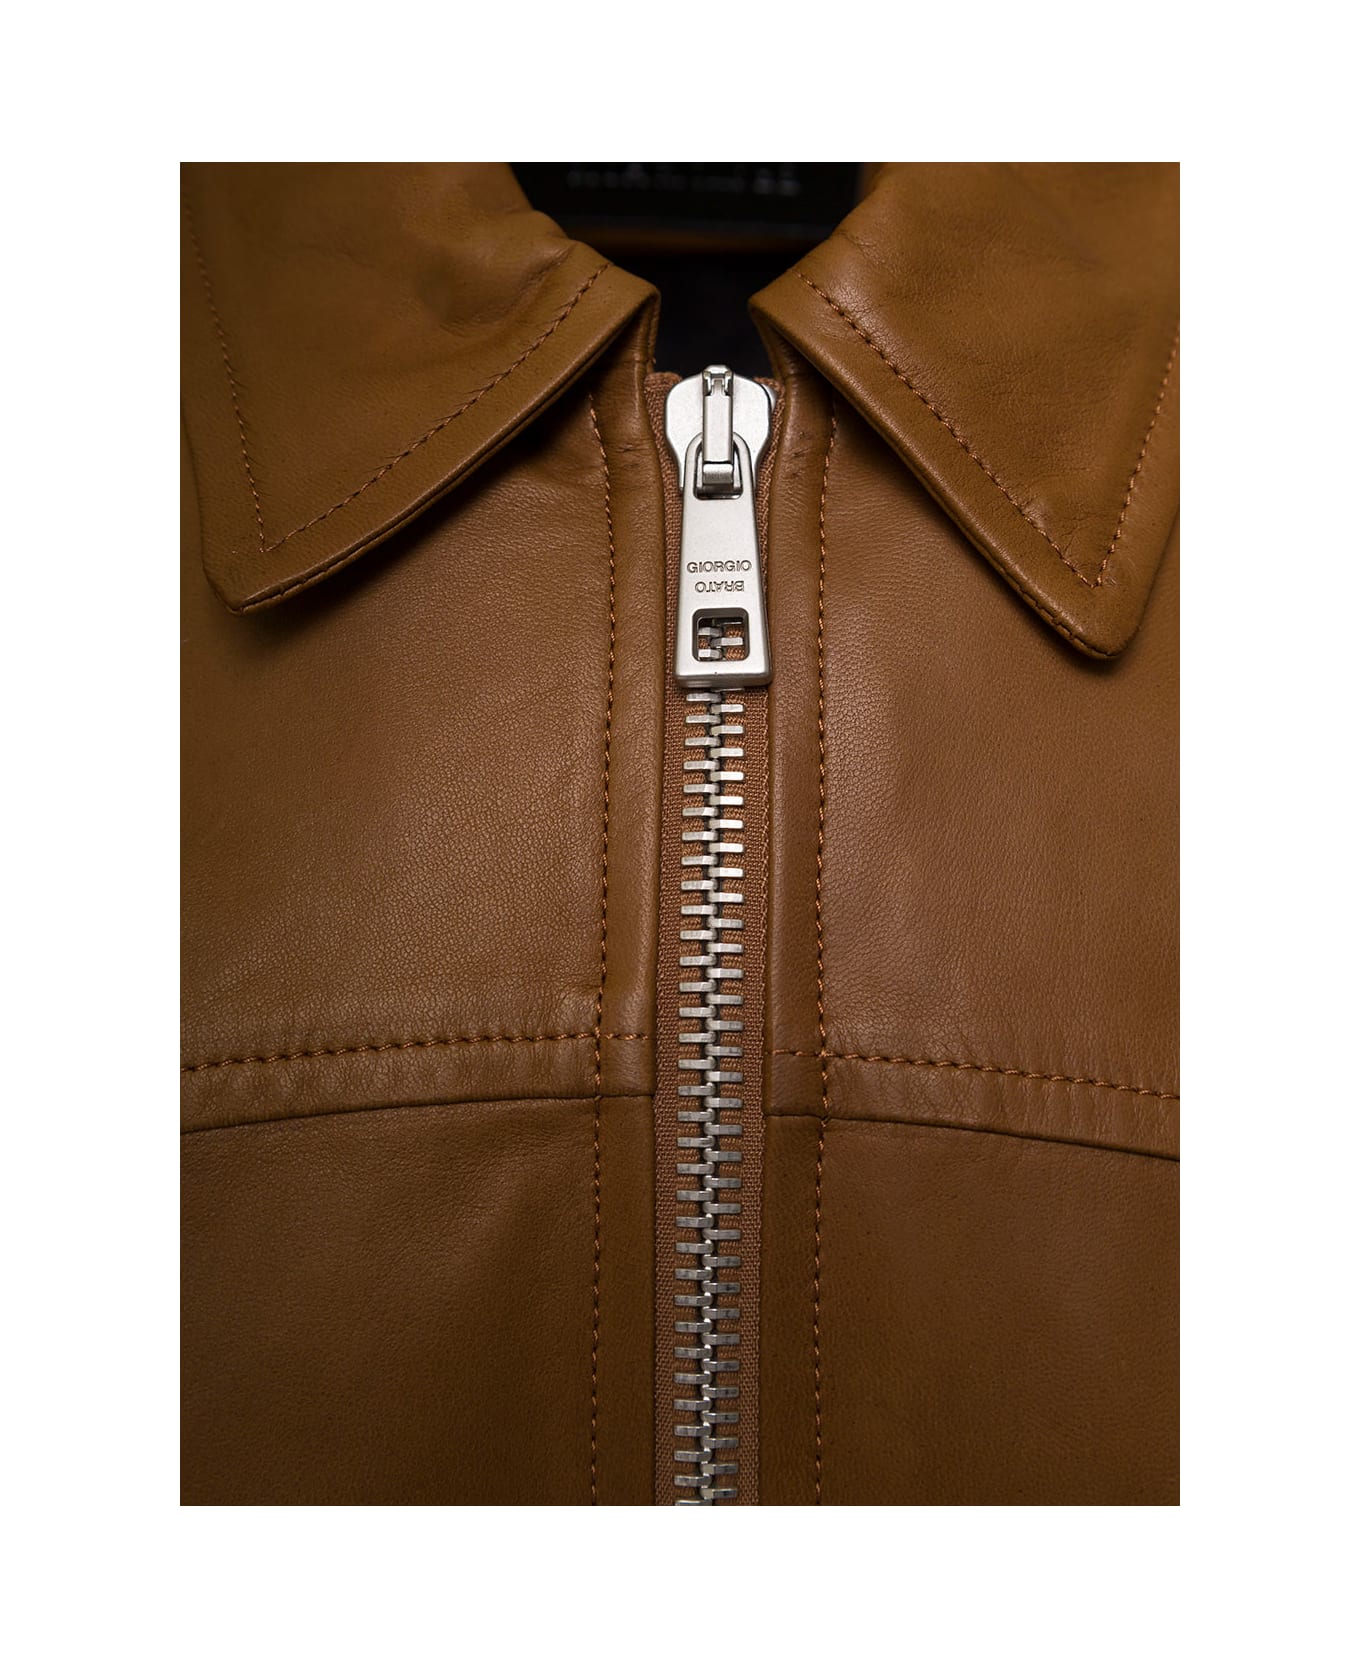 Giorgio Brato Brown Western Jacket With Two-way Zip In Leather Man - Beige